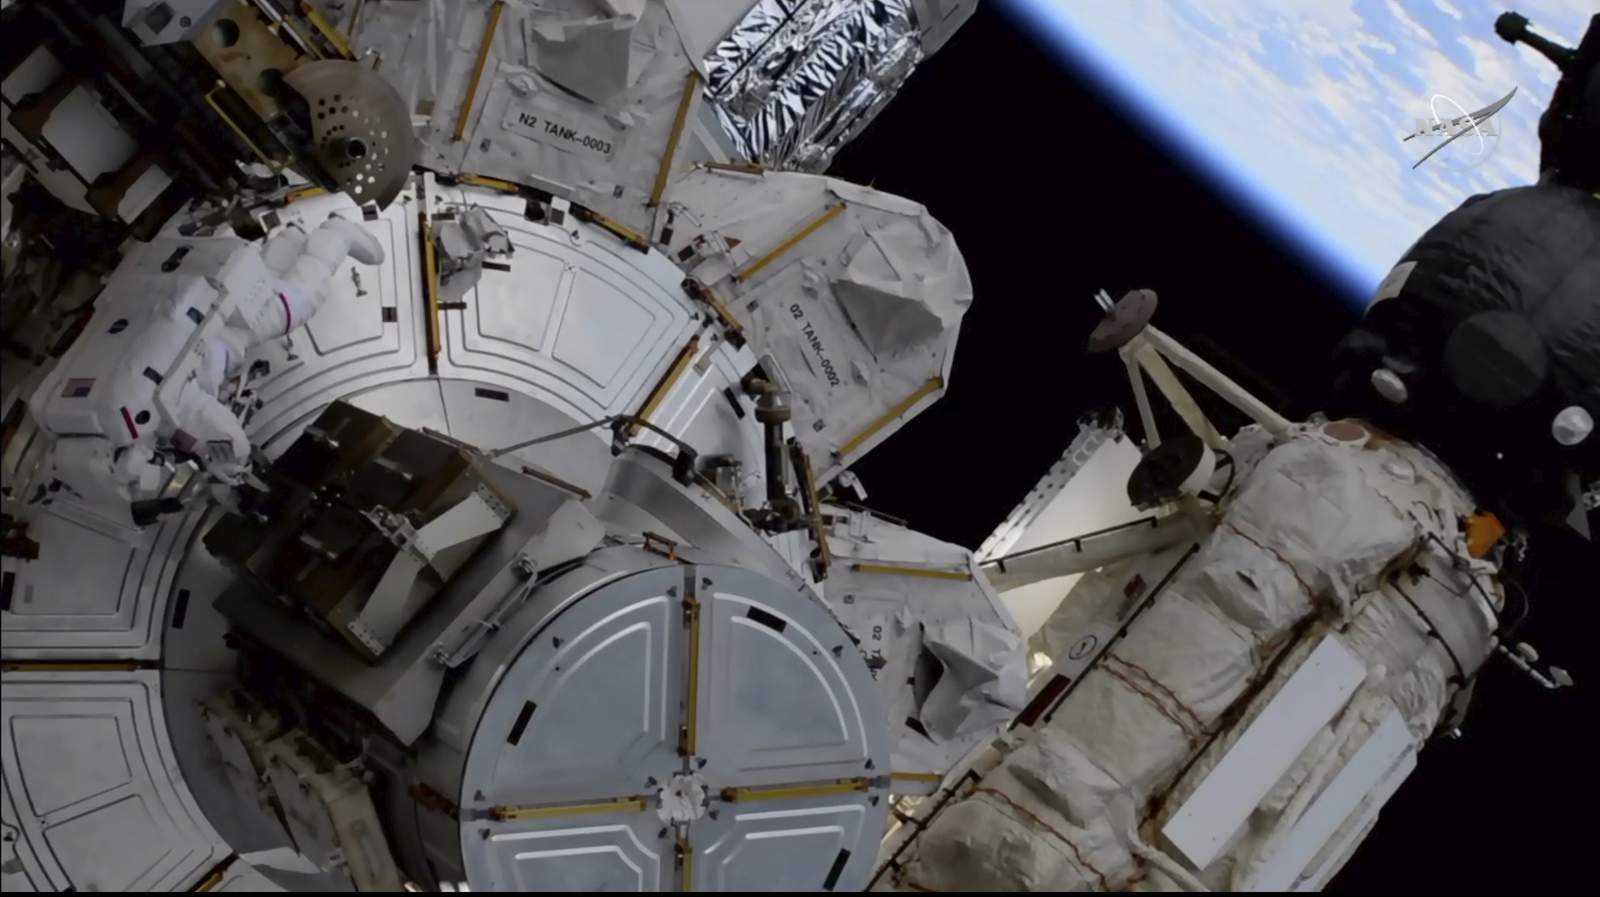 NASA astronauts conduct fifth spacewalk of 2021 as part of upgrades to ISS